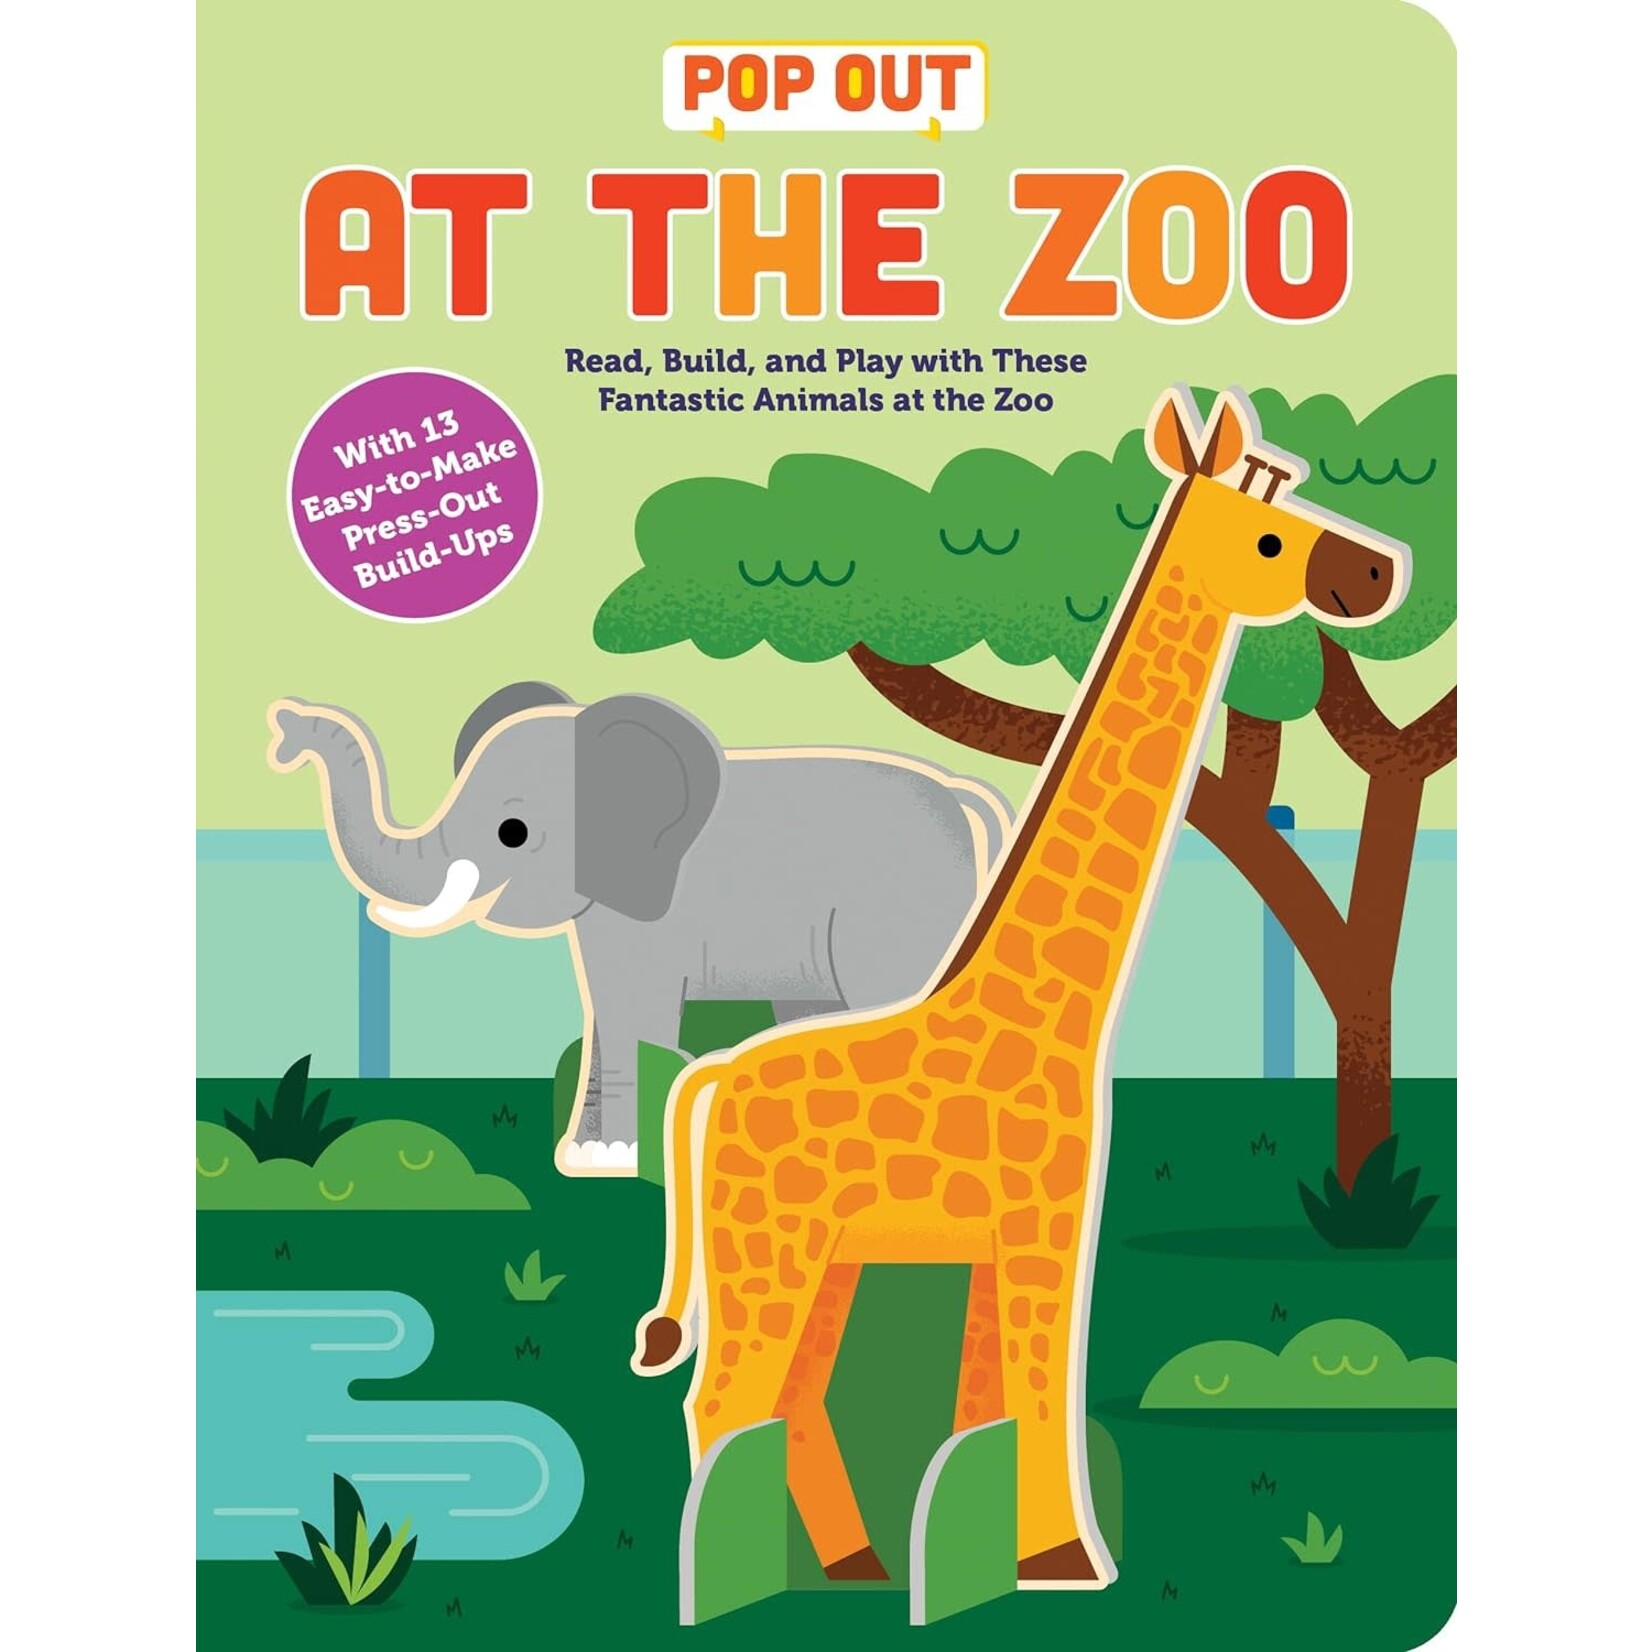 Pop Out at the Zoo